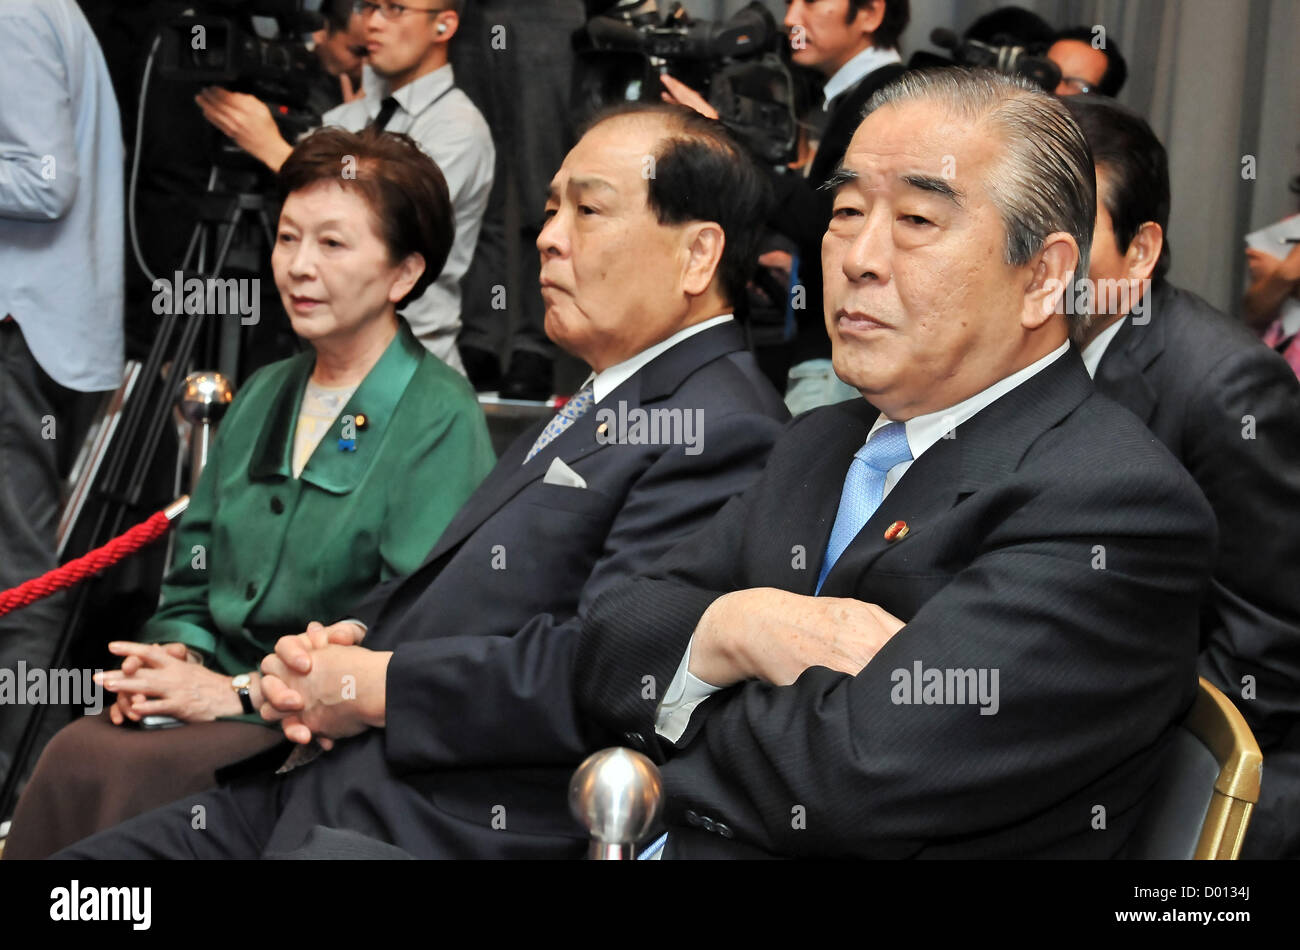 Kyoko Nakayama, leader of the Party for Japanese Kokoro, attends a News  Photo - Getty Images